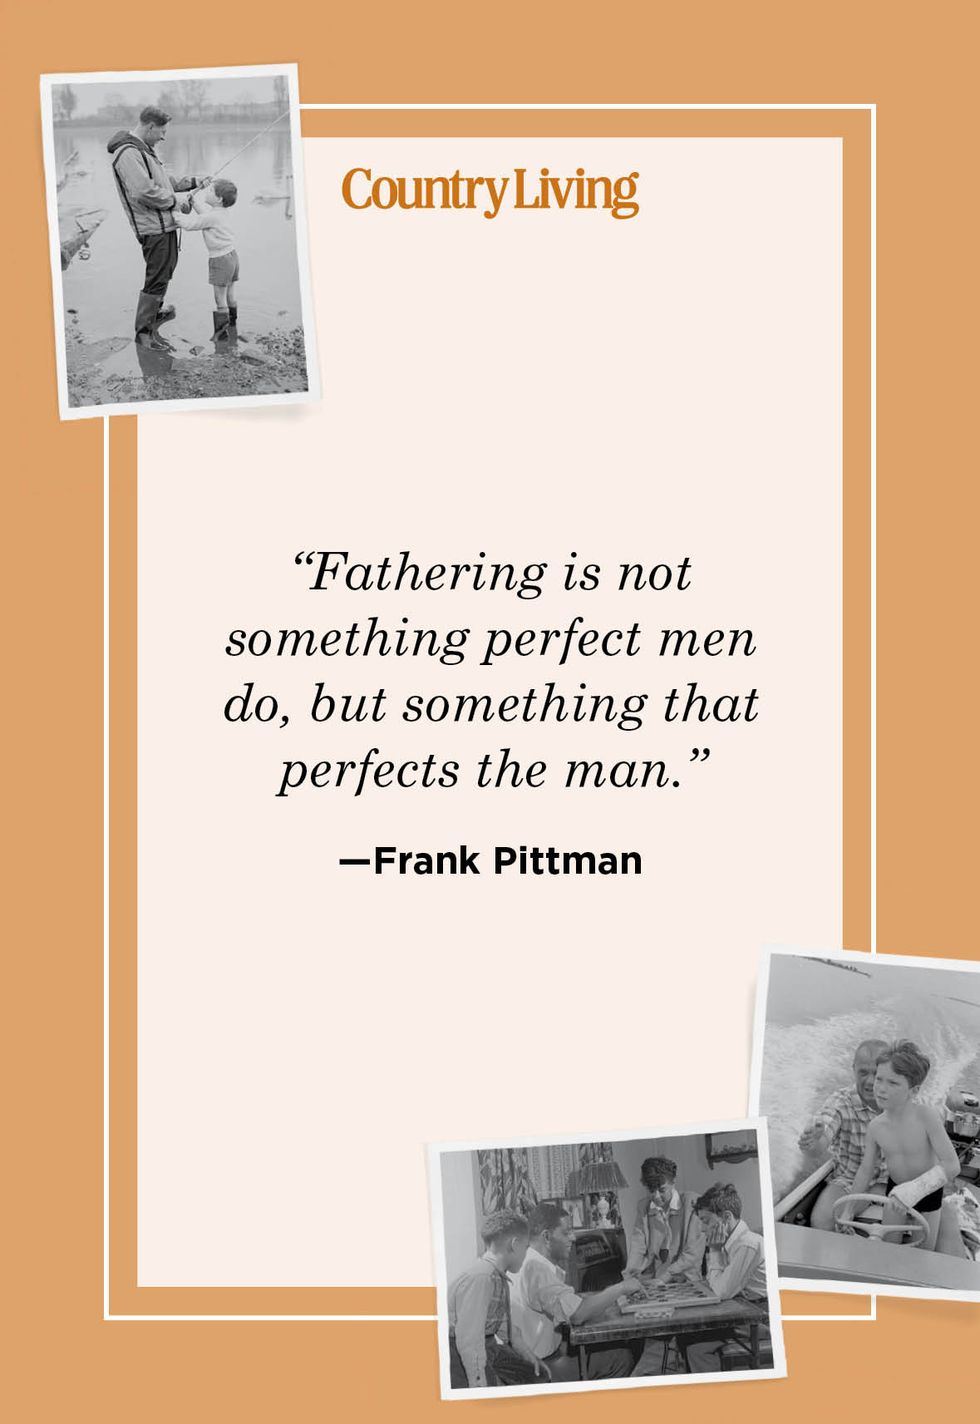 fathering is not 
something perfect men do but something that perfects the man